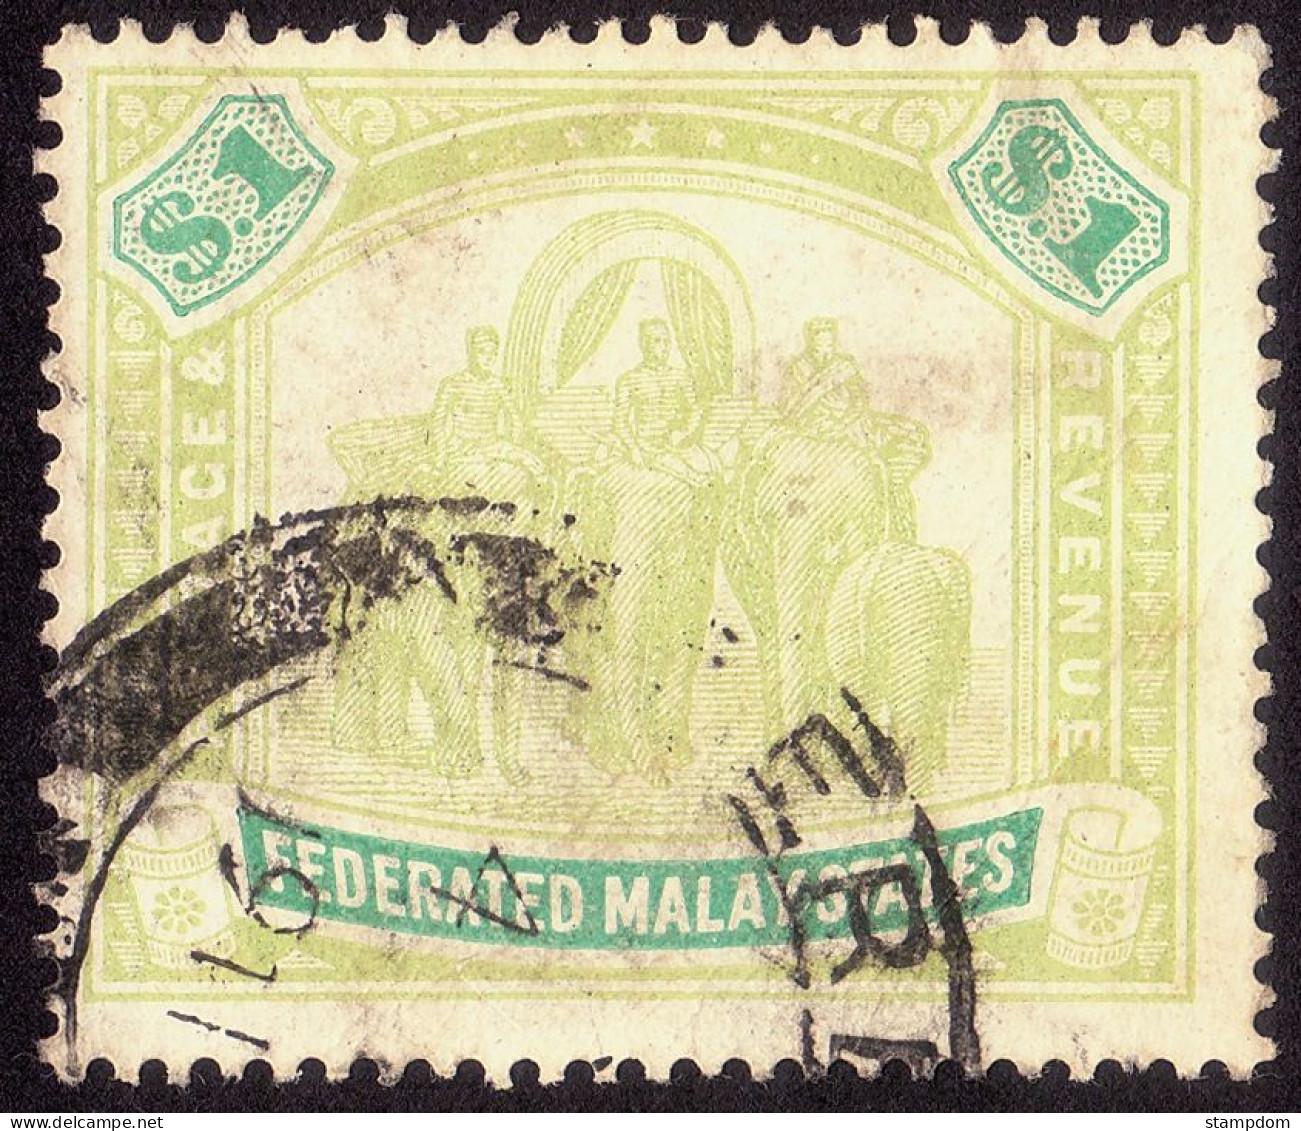 FEDERATED MALAY STATES FMS 1907 $1 Wmk.MCA Sc#34 -USED Partial SERemban CDS @TE102 - Federated Malay States